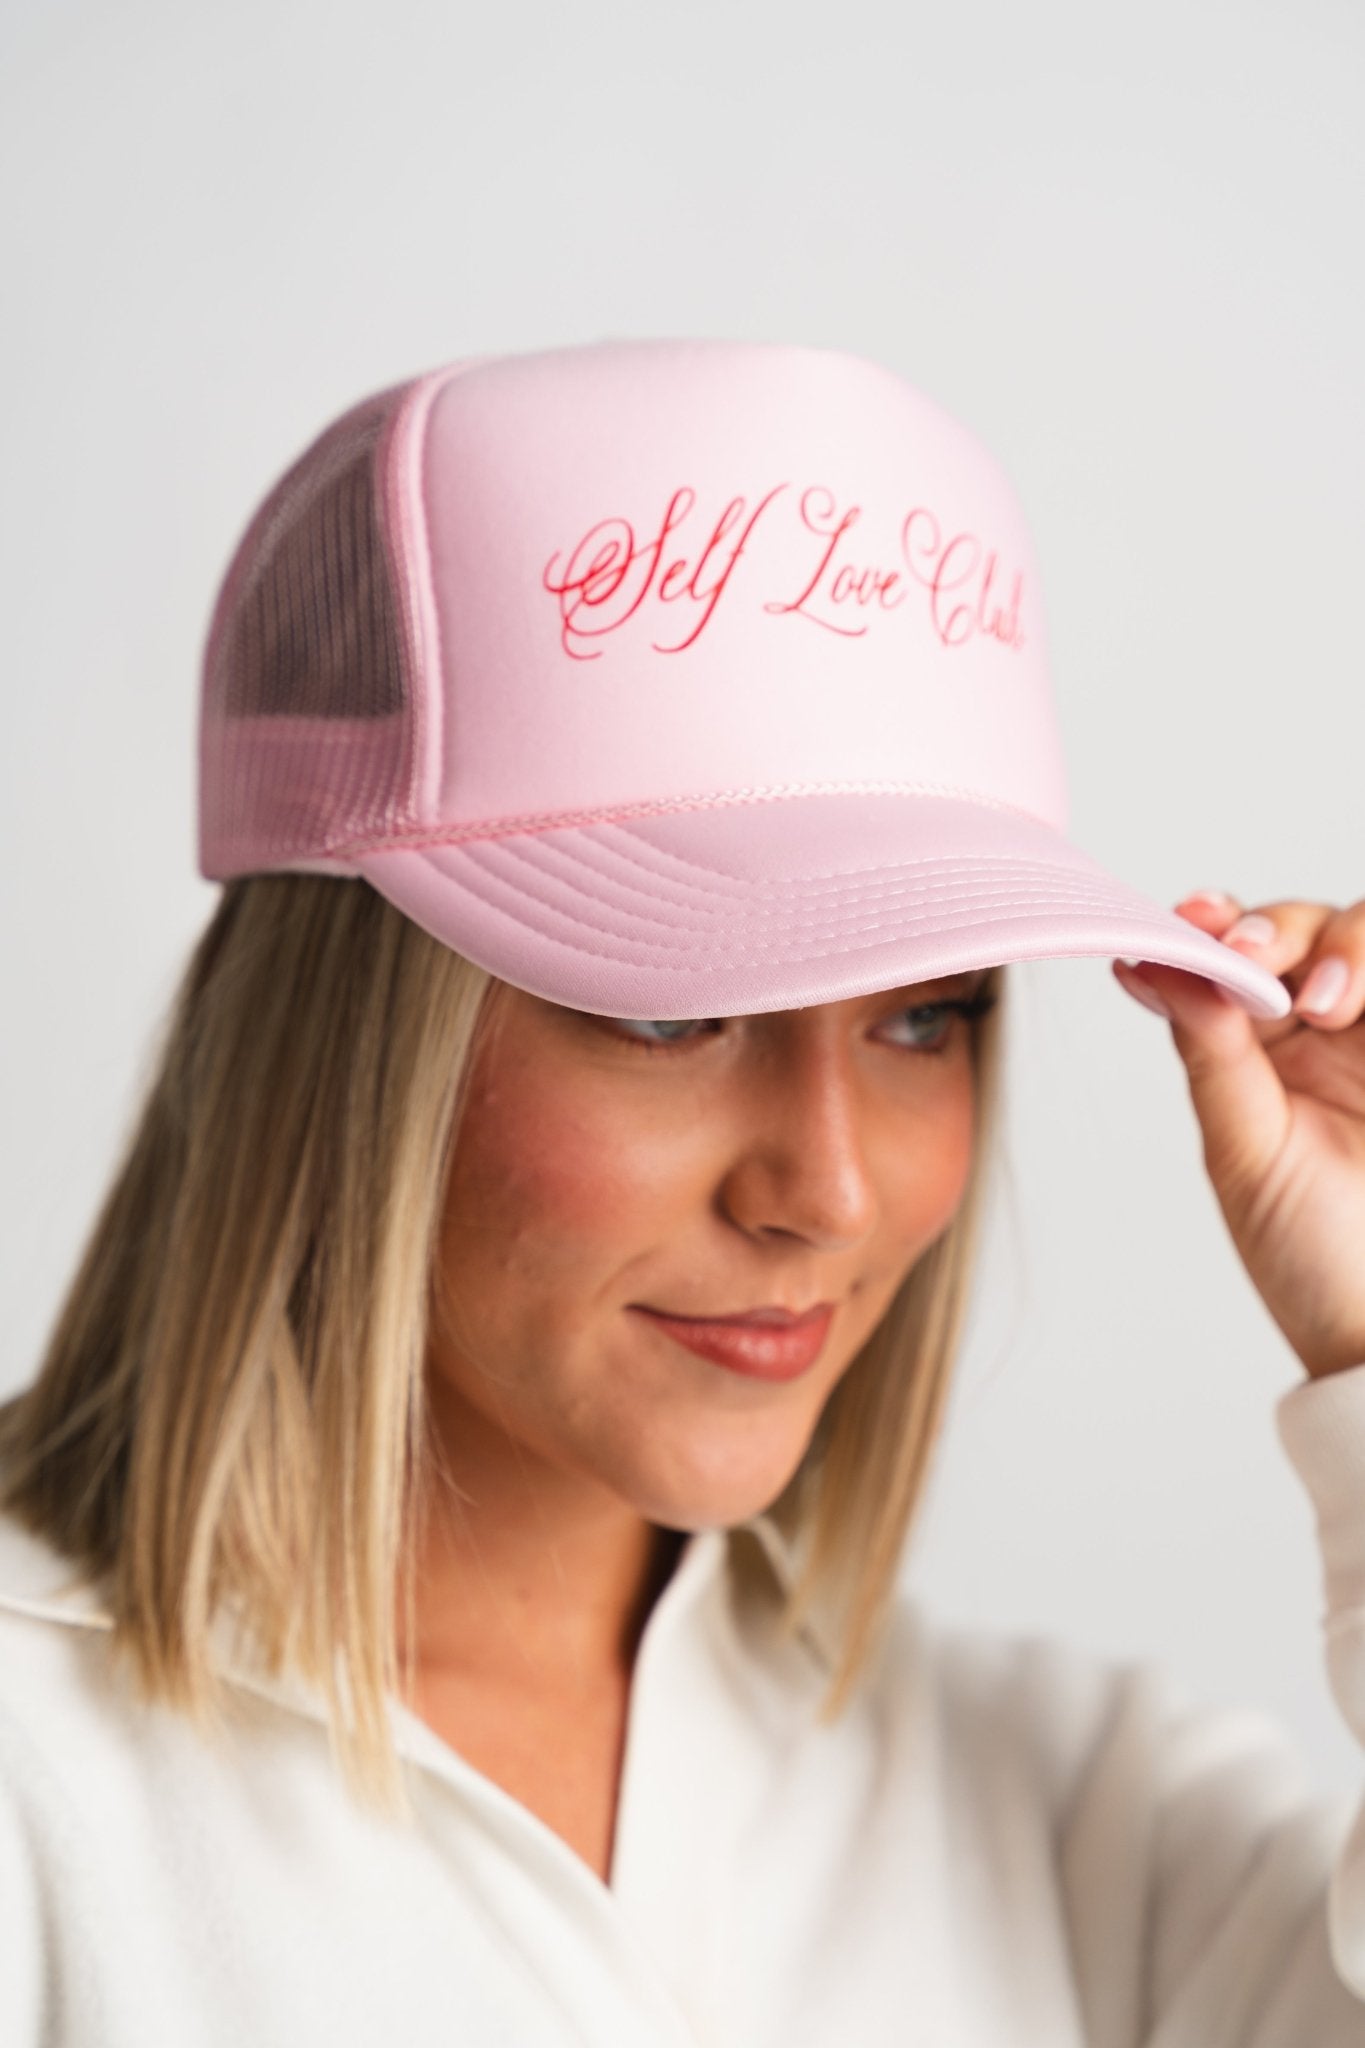 Self love club trucker hat light pink - Trendy Valentine's T-Shirts at Lush Fashion Lounge Boutique in Oklahoma City